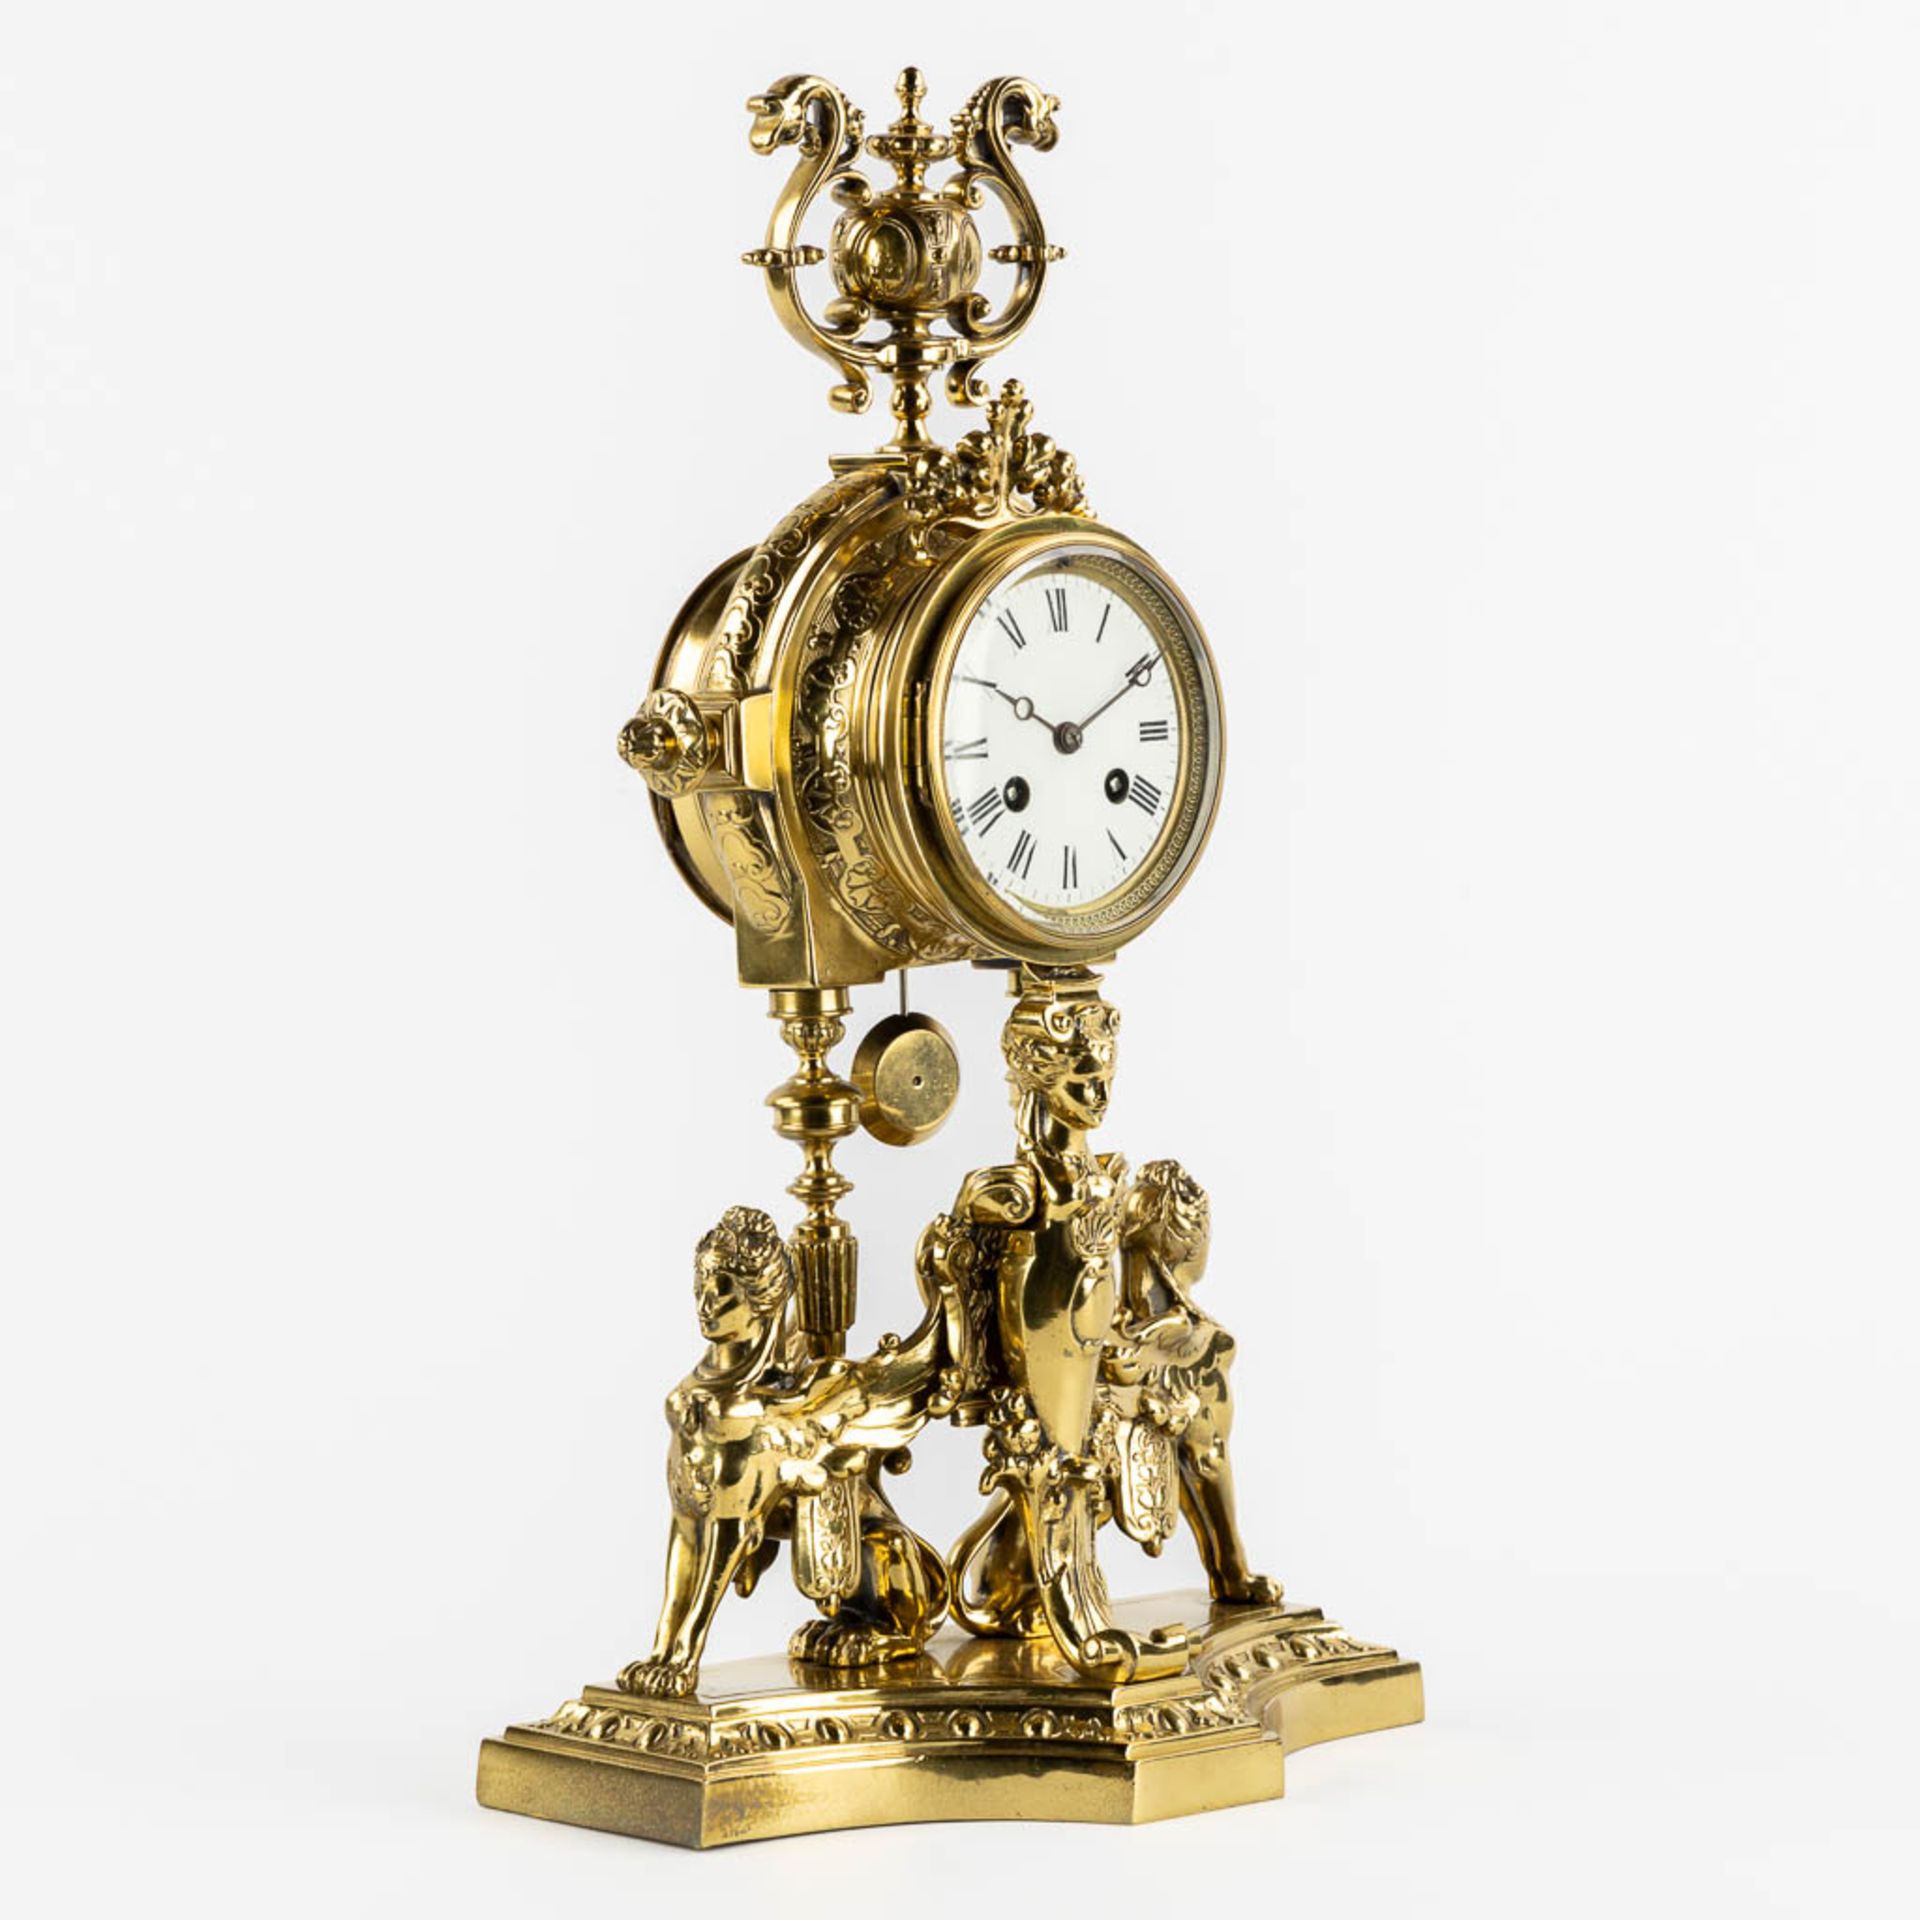 A mantle clock, polished bronze, decorated with Mythological Figures. Circa 1880. (L:15 x W:26 x H:4 - Image 3 of 12